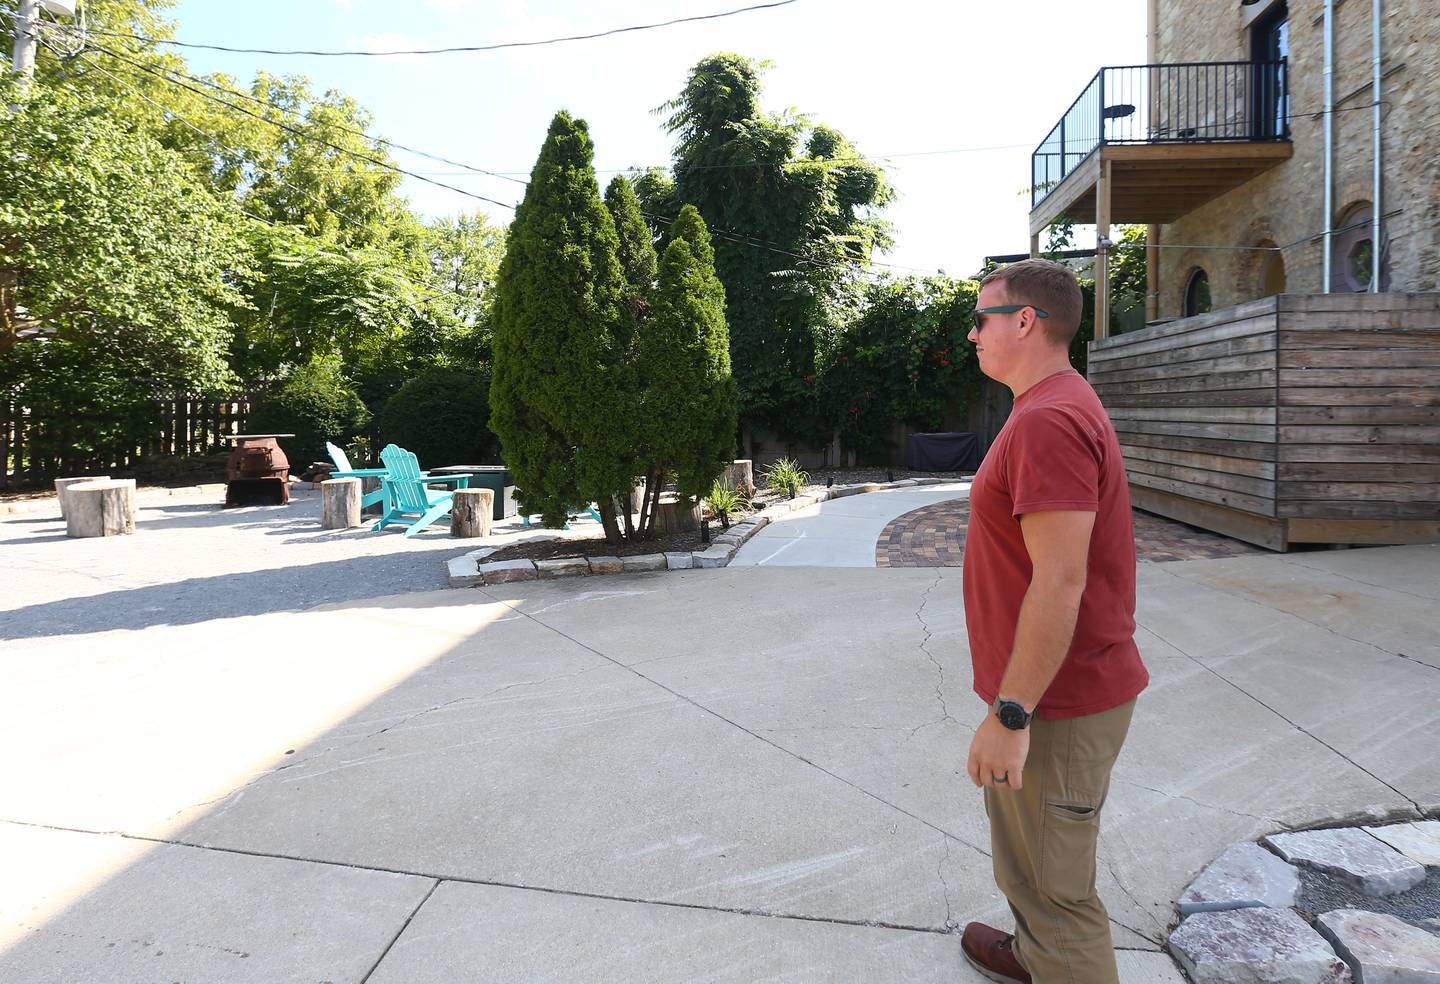 Dan Stash observes the space behind the Bickerman building on Wednesday, Aug. 24, 2022 in Utica.